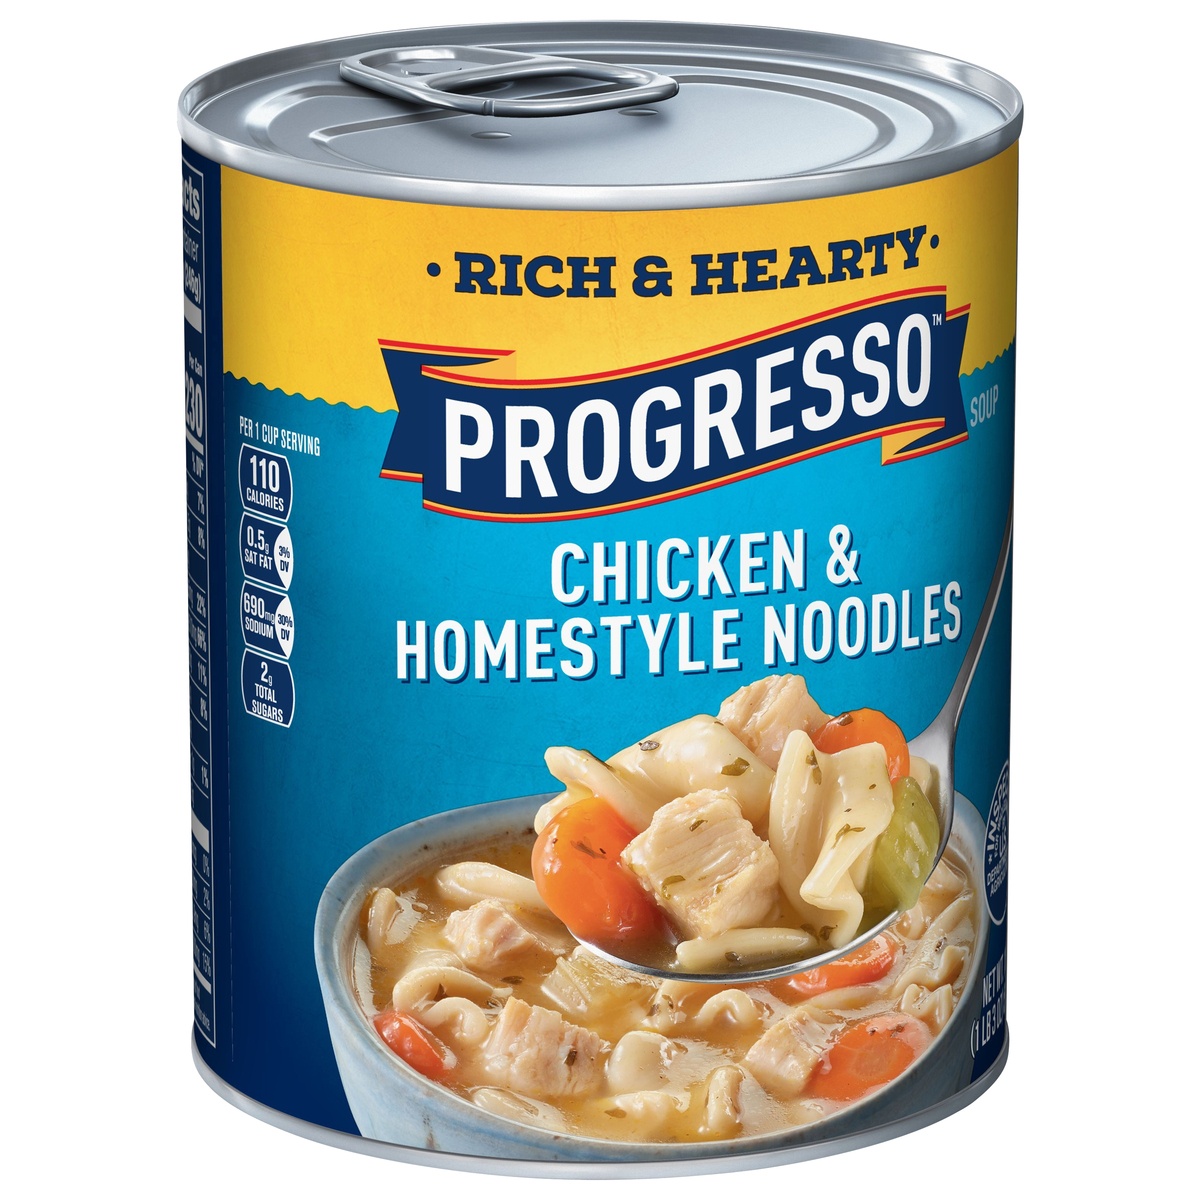 slide 2 of 11, Progresso Rich & Hearty Chicken & Homestyle Noodles SoupCan, 19 oz